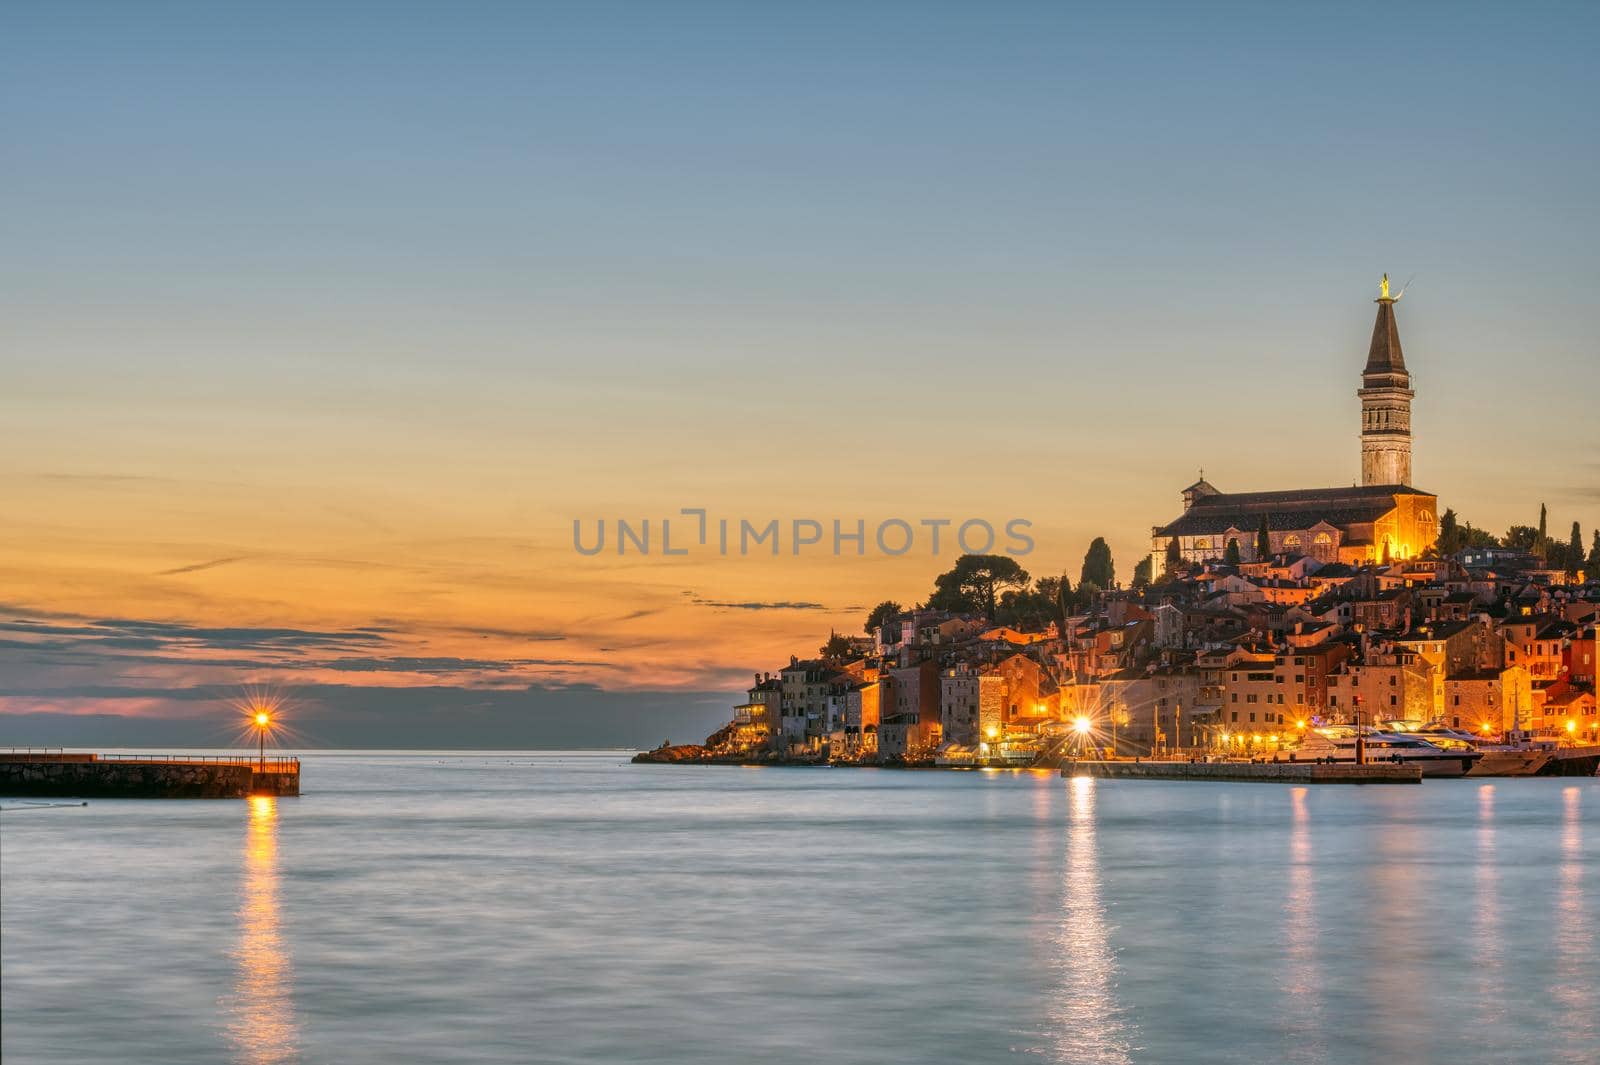 View of the beautiful old town of Rovinj in Croatia after sunset